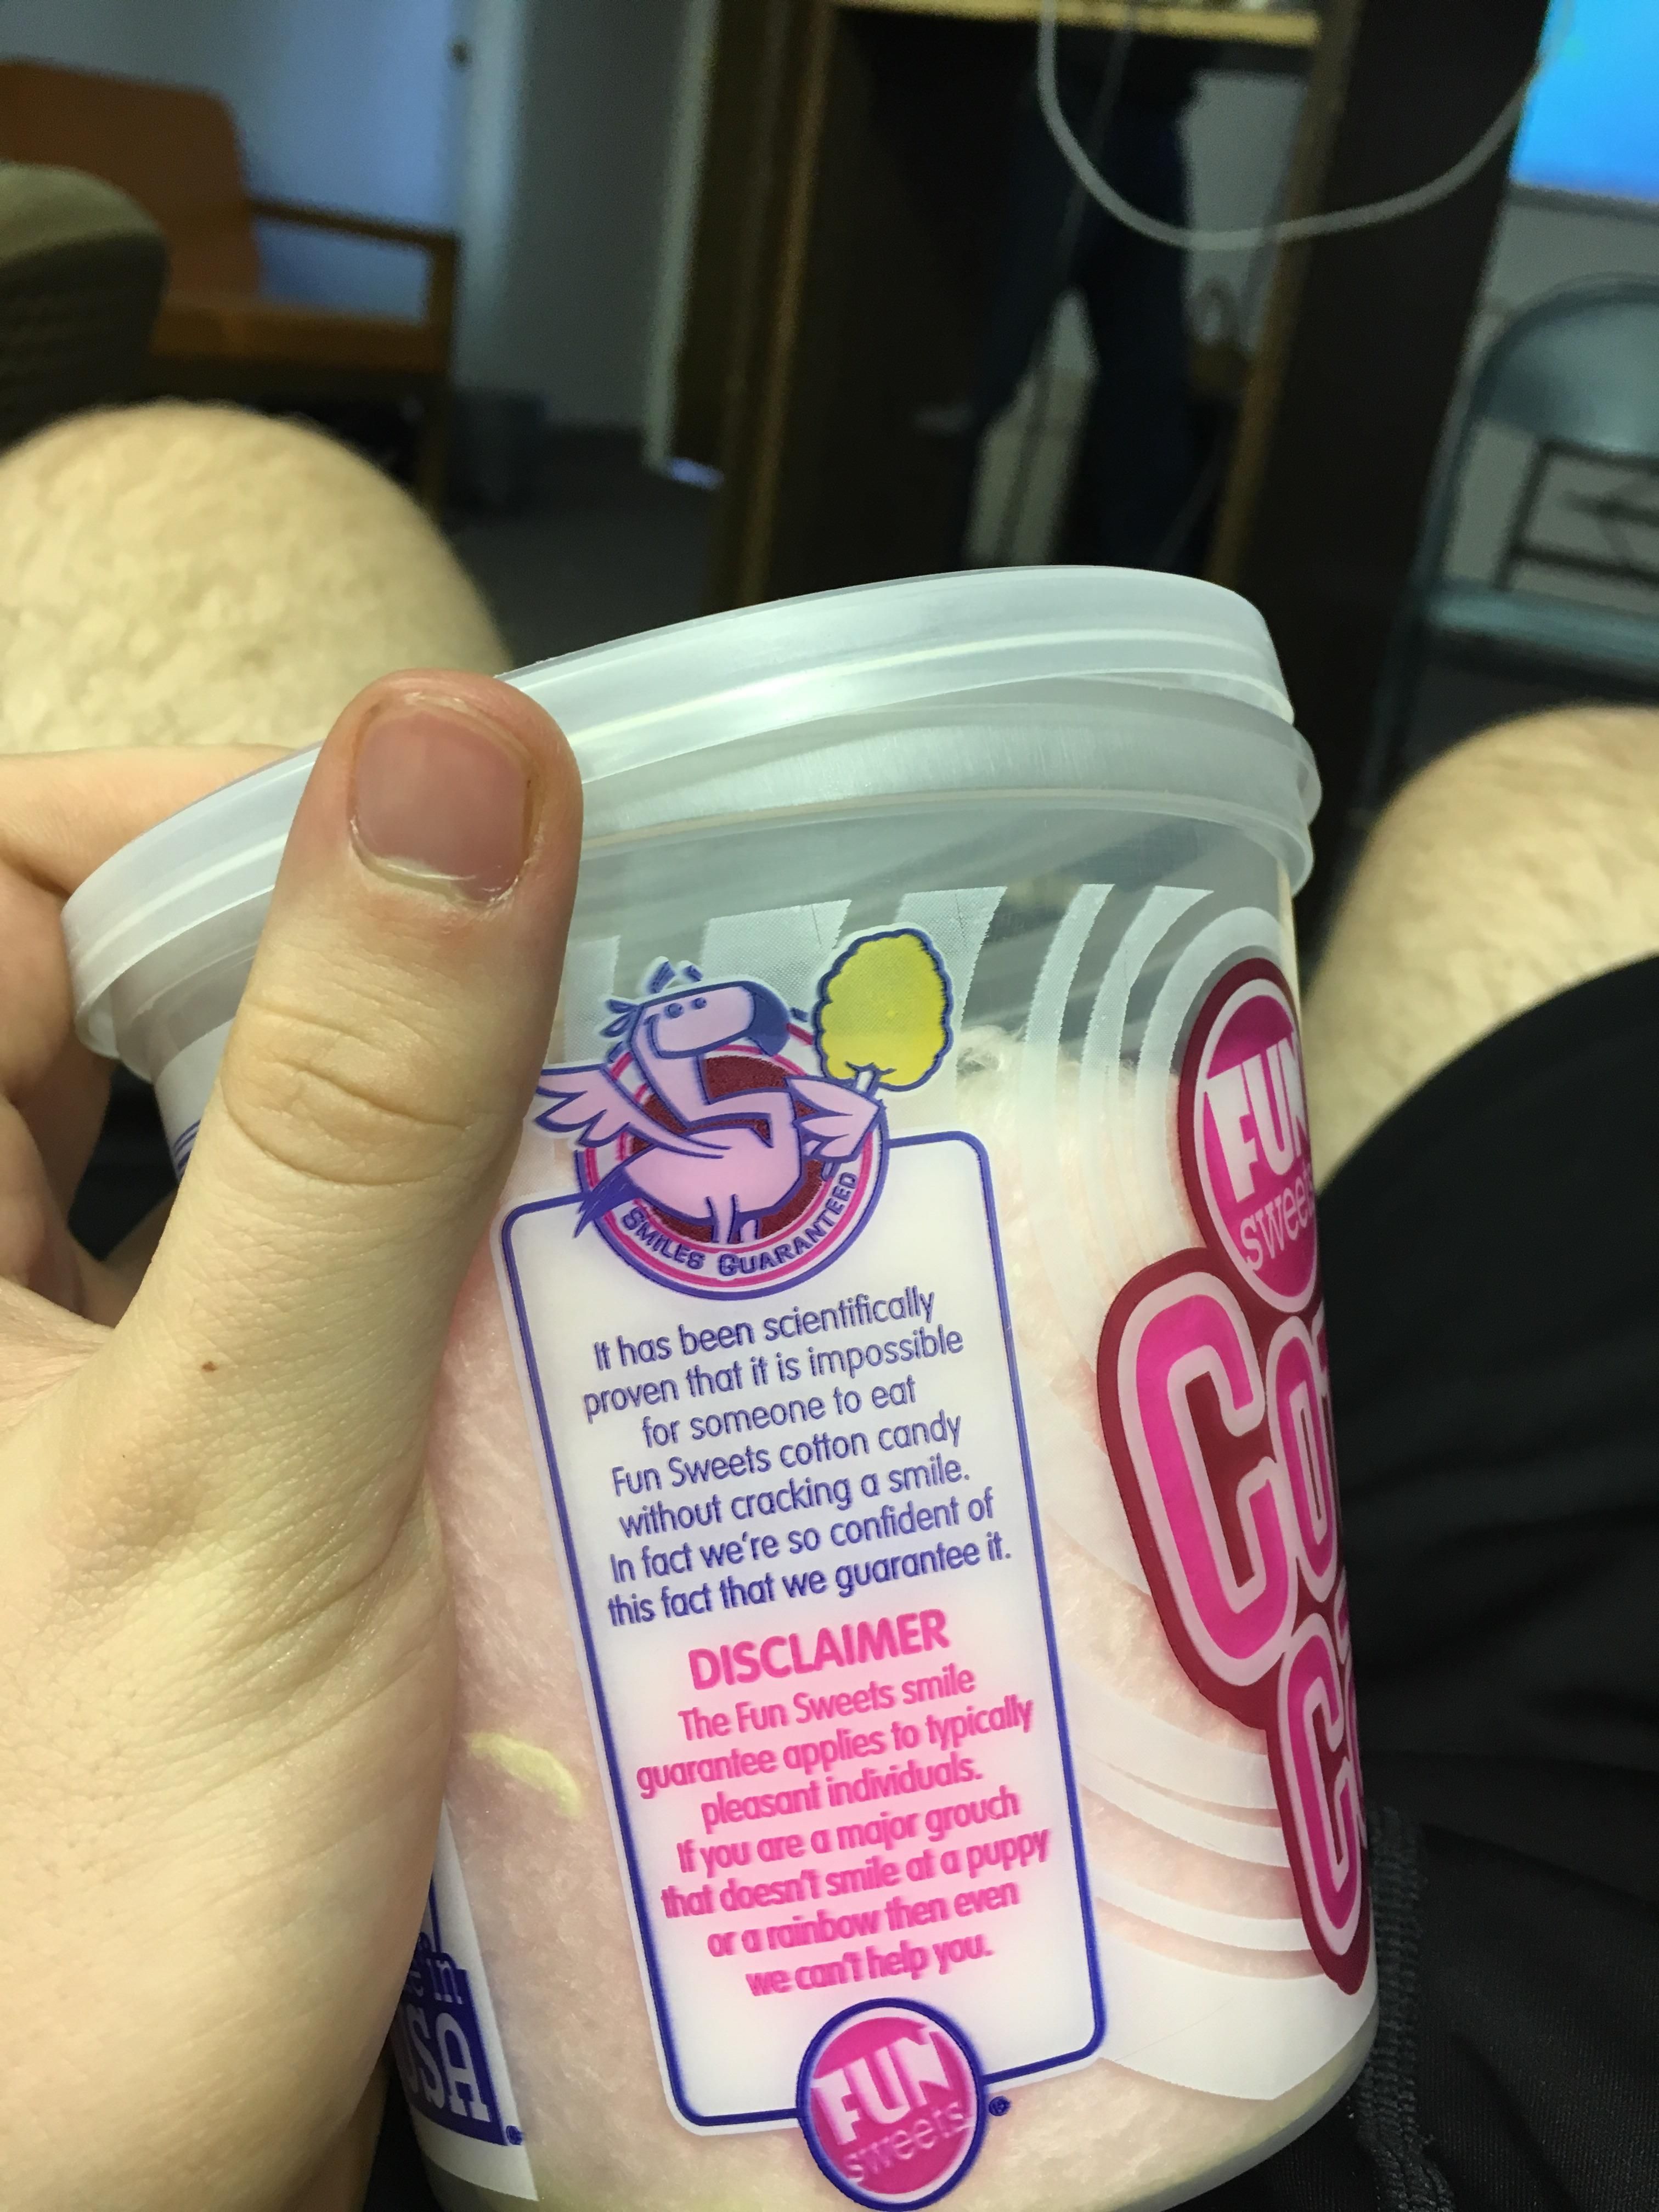 The disclaimer on the cotton candy.